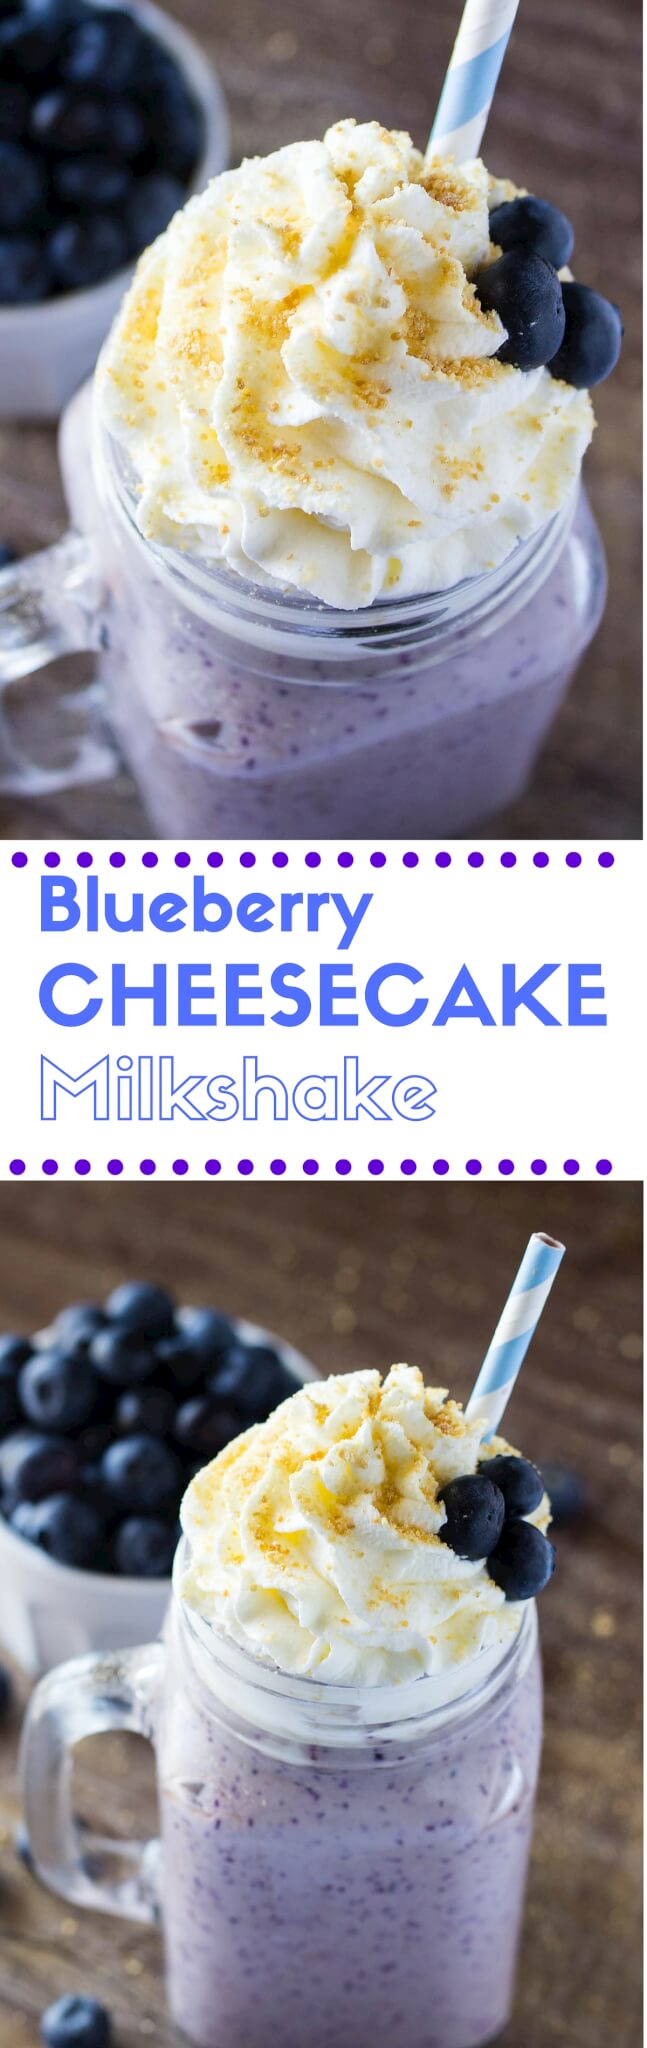 This Blueberry Cheesecake Milkshake has all the flavor of a vanilla milkshake & blueberry cheesecake! Thick, creamy & so decadent! You NEED to make this!